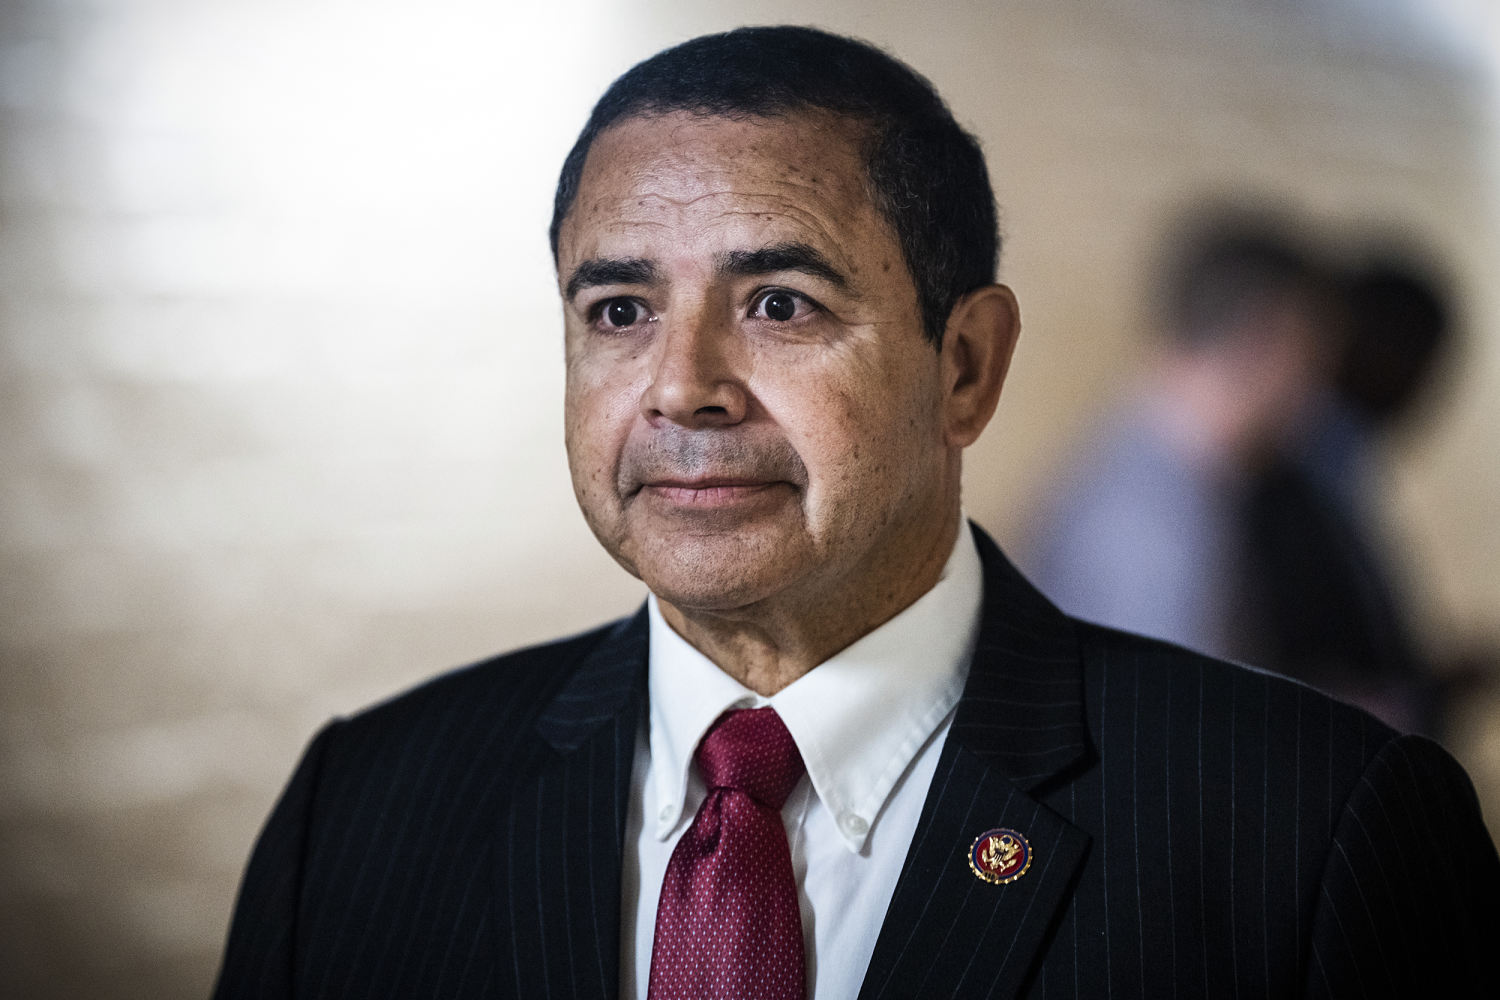 DOJ expected to announce indictment of Texas Democratic Rep. Henry Cuellar, sources say